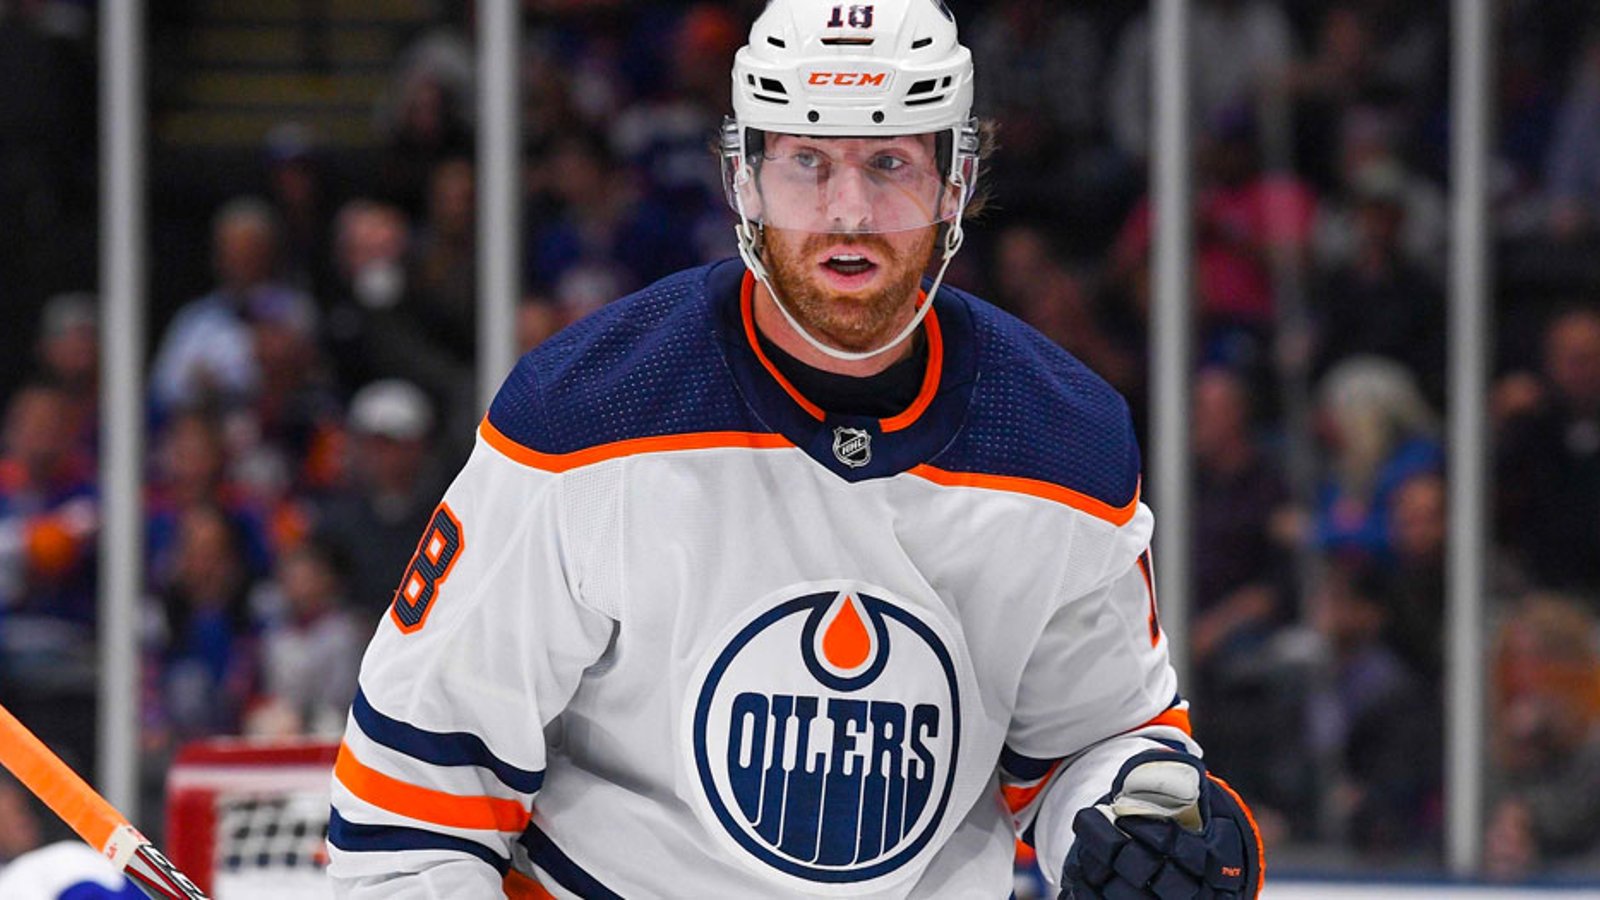 Oilers’ Neal scores 4 goals because of new team rule! 